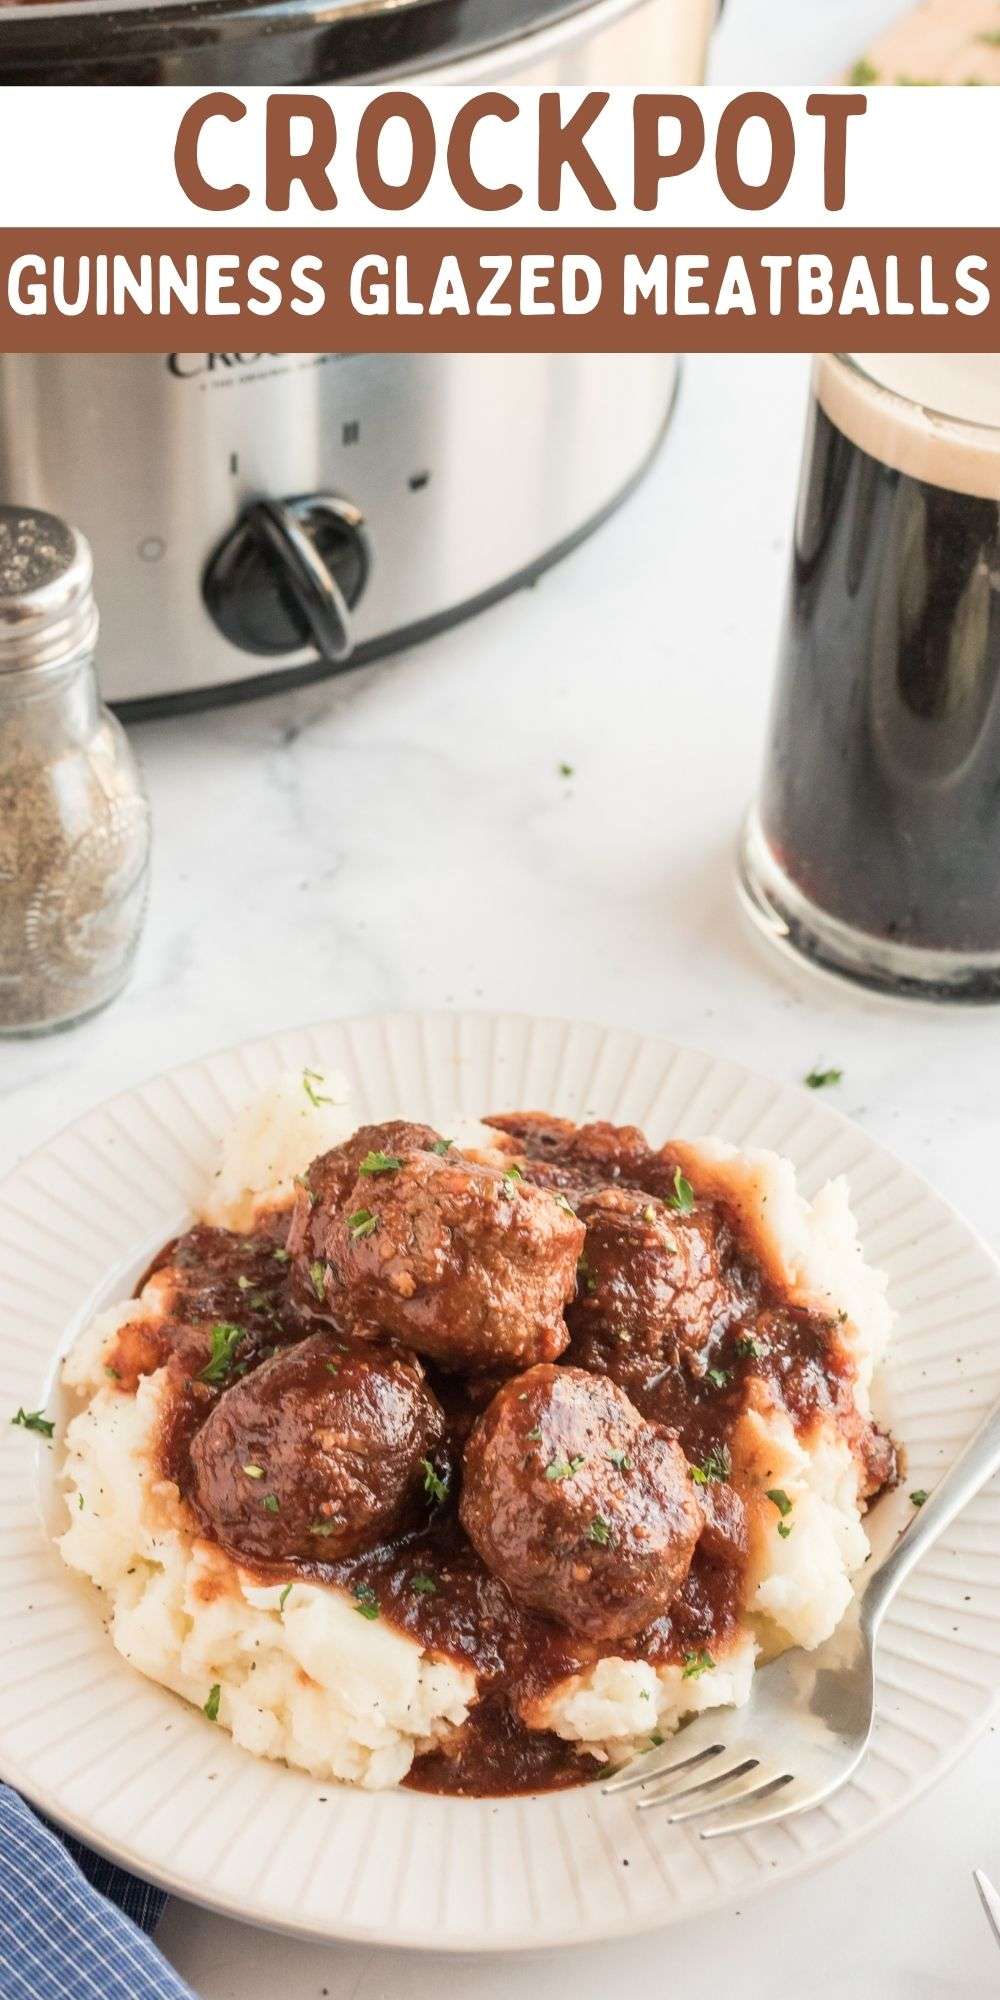 This Crockpot Guinness Glazed Meatballs recipe offers a flavorful meatball dish that can be served as an appetizer or for dinner. via @familyfresh